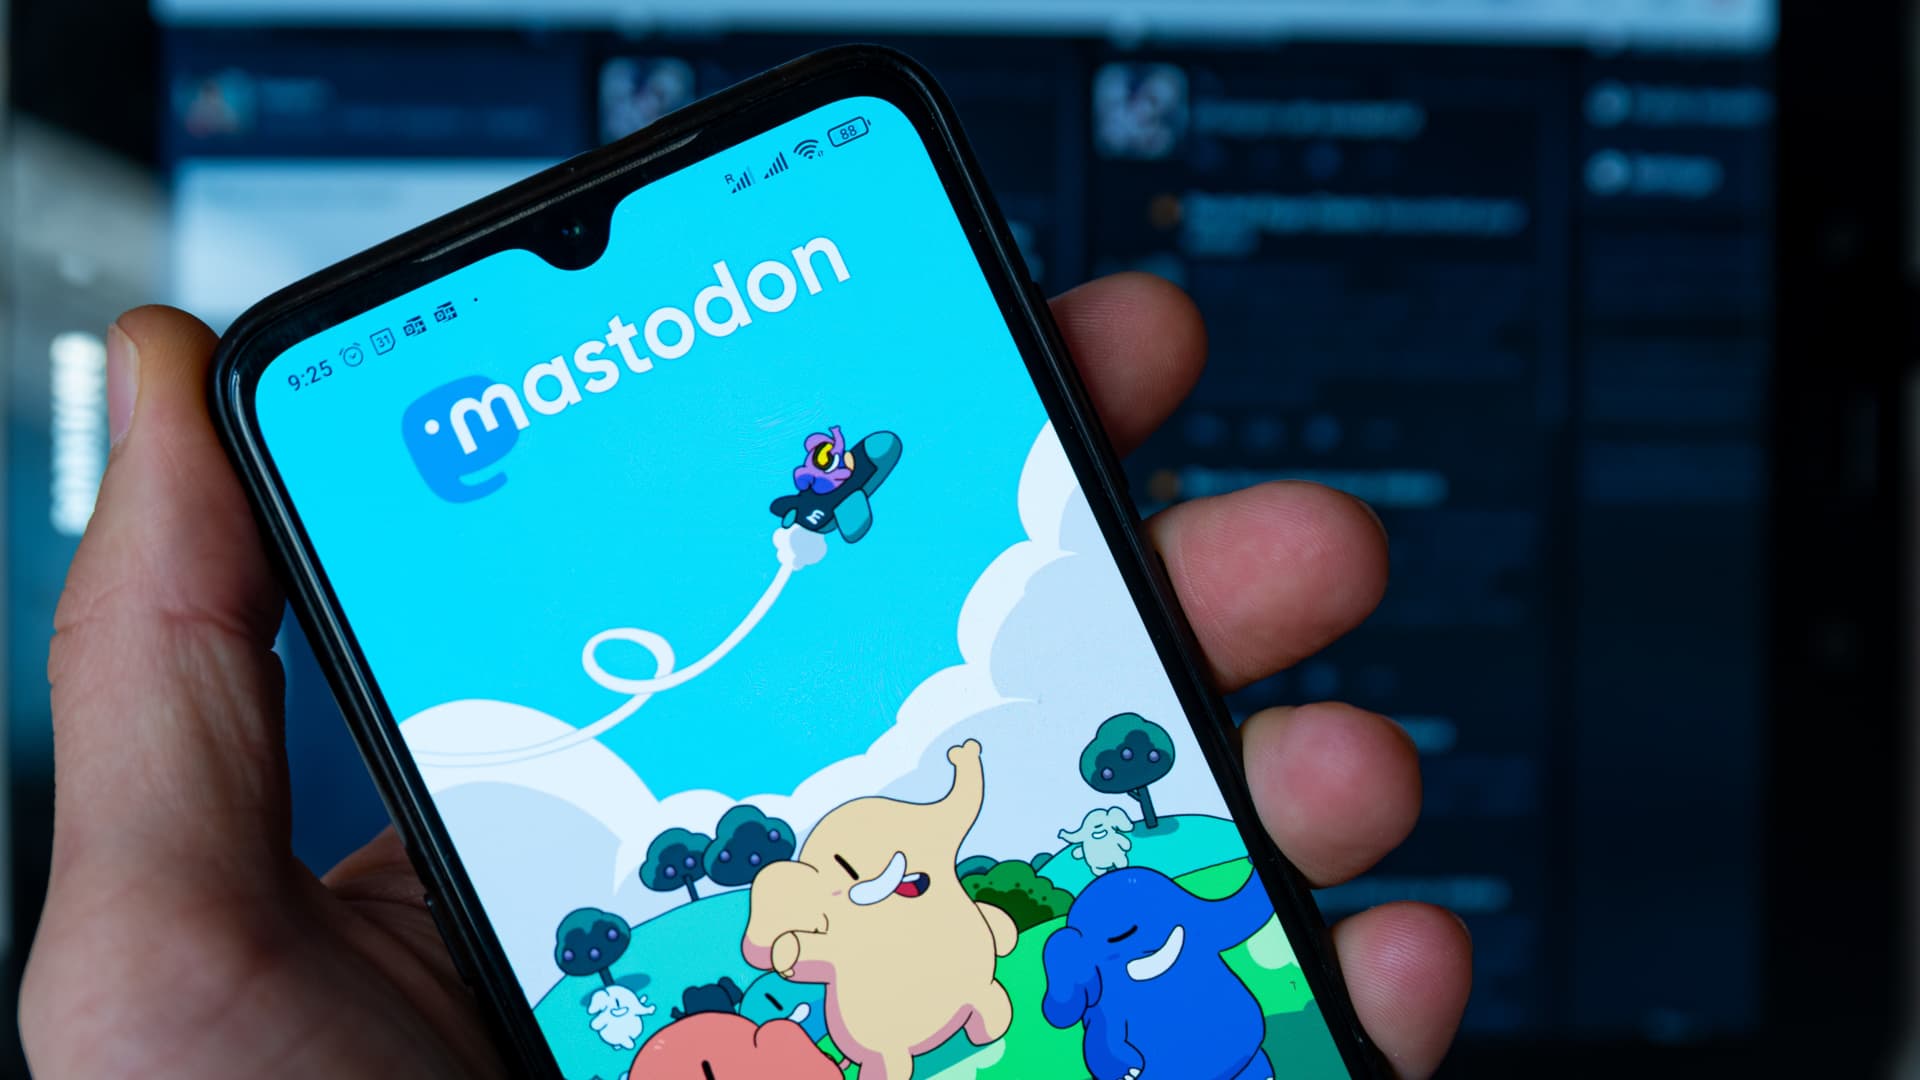 If you’re thinking about quitting Elon Musk’s Twitter, here’s how to use alternative Mastodon